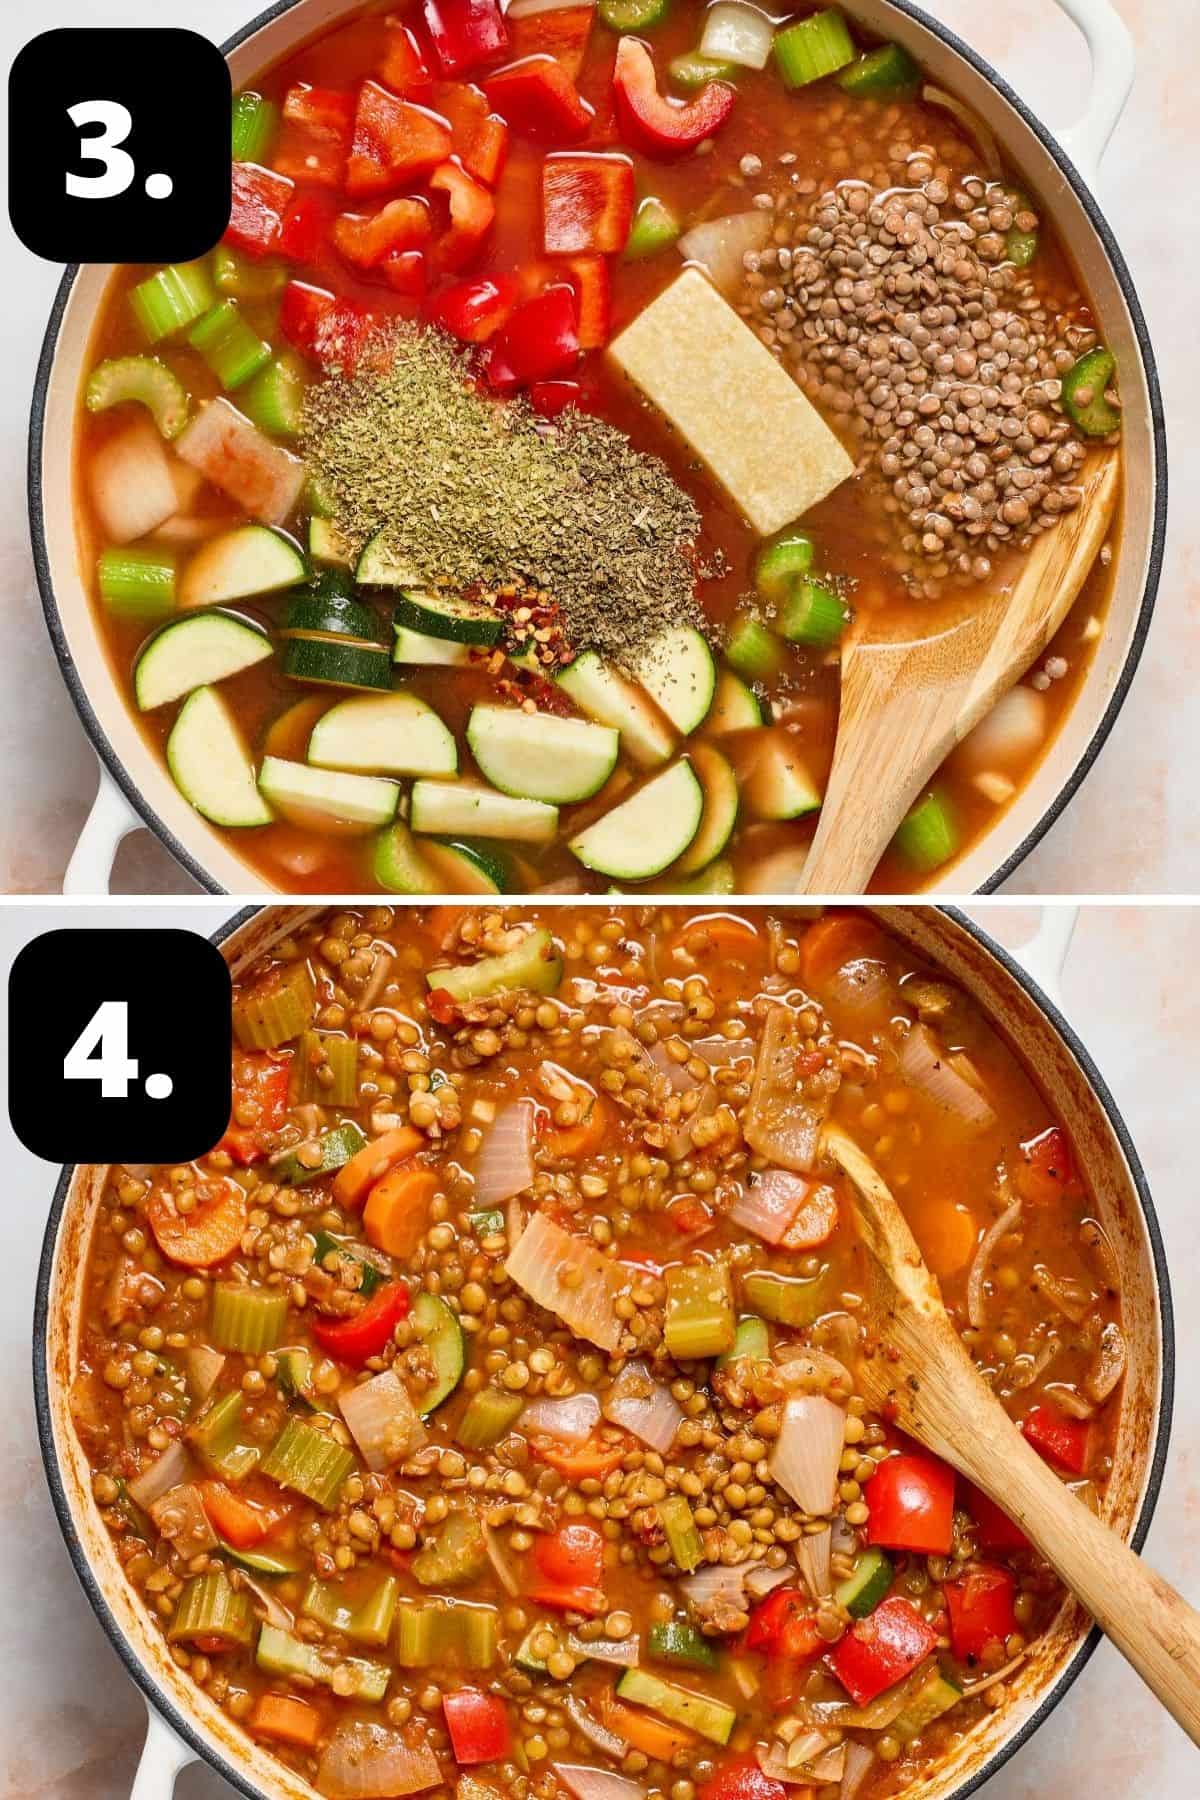 Steps 3-4 of preparing this recipe: the stock and seasonings added to the dish and the cooked stew.